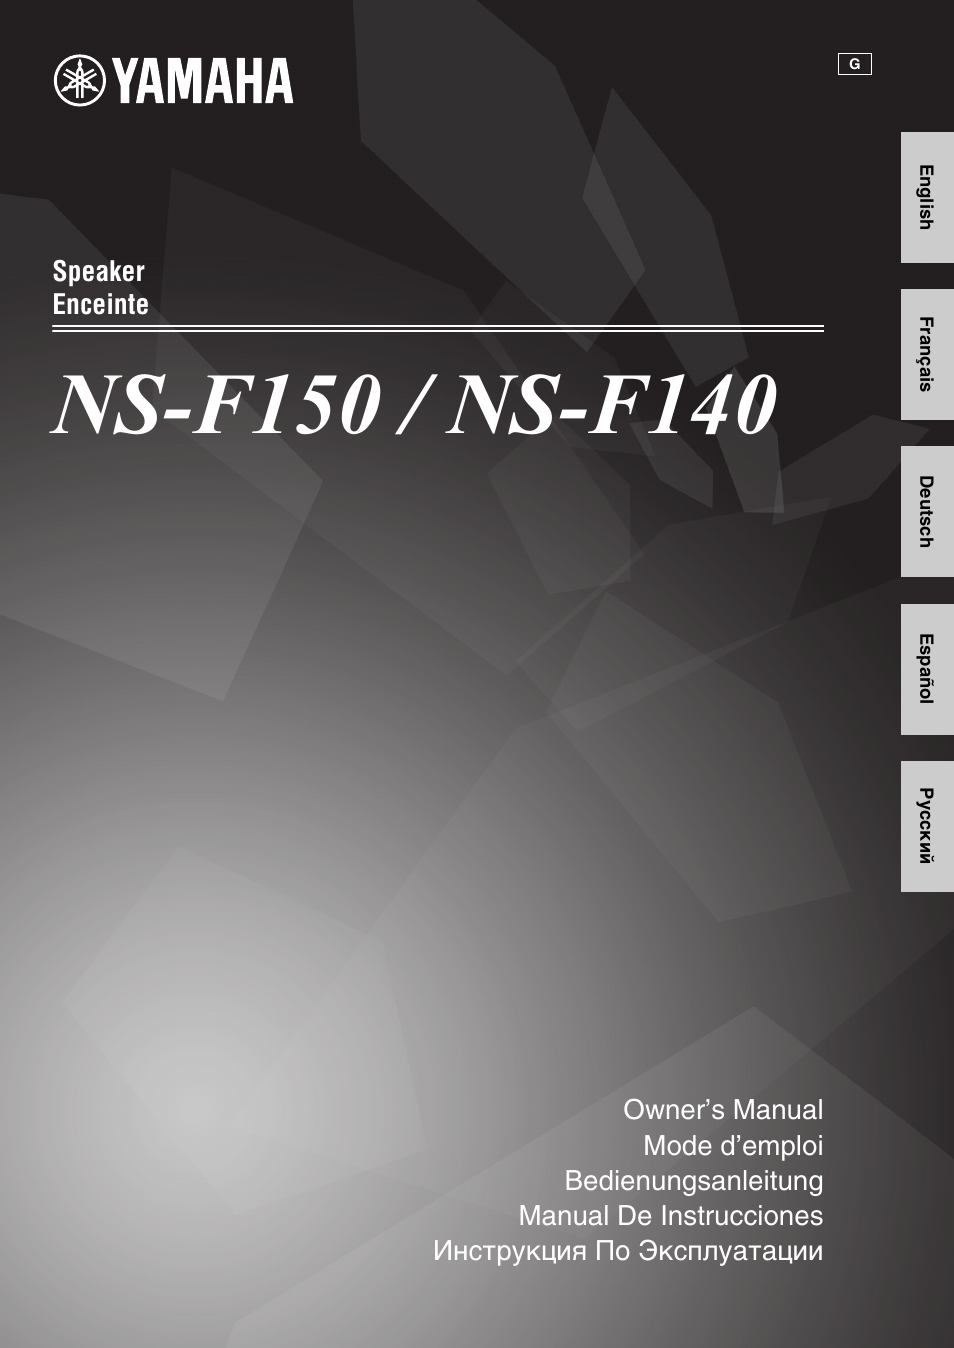 Yamaha NS-F150 User Manual | 28 pages | Also for: NS-F140